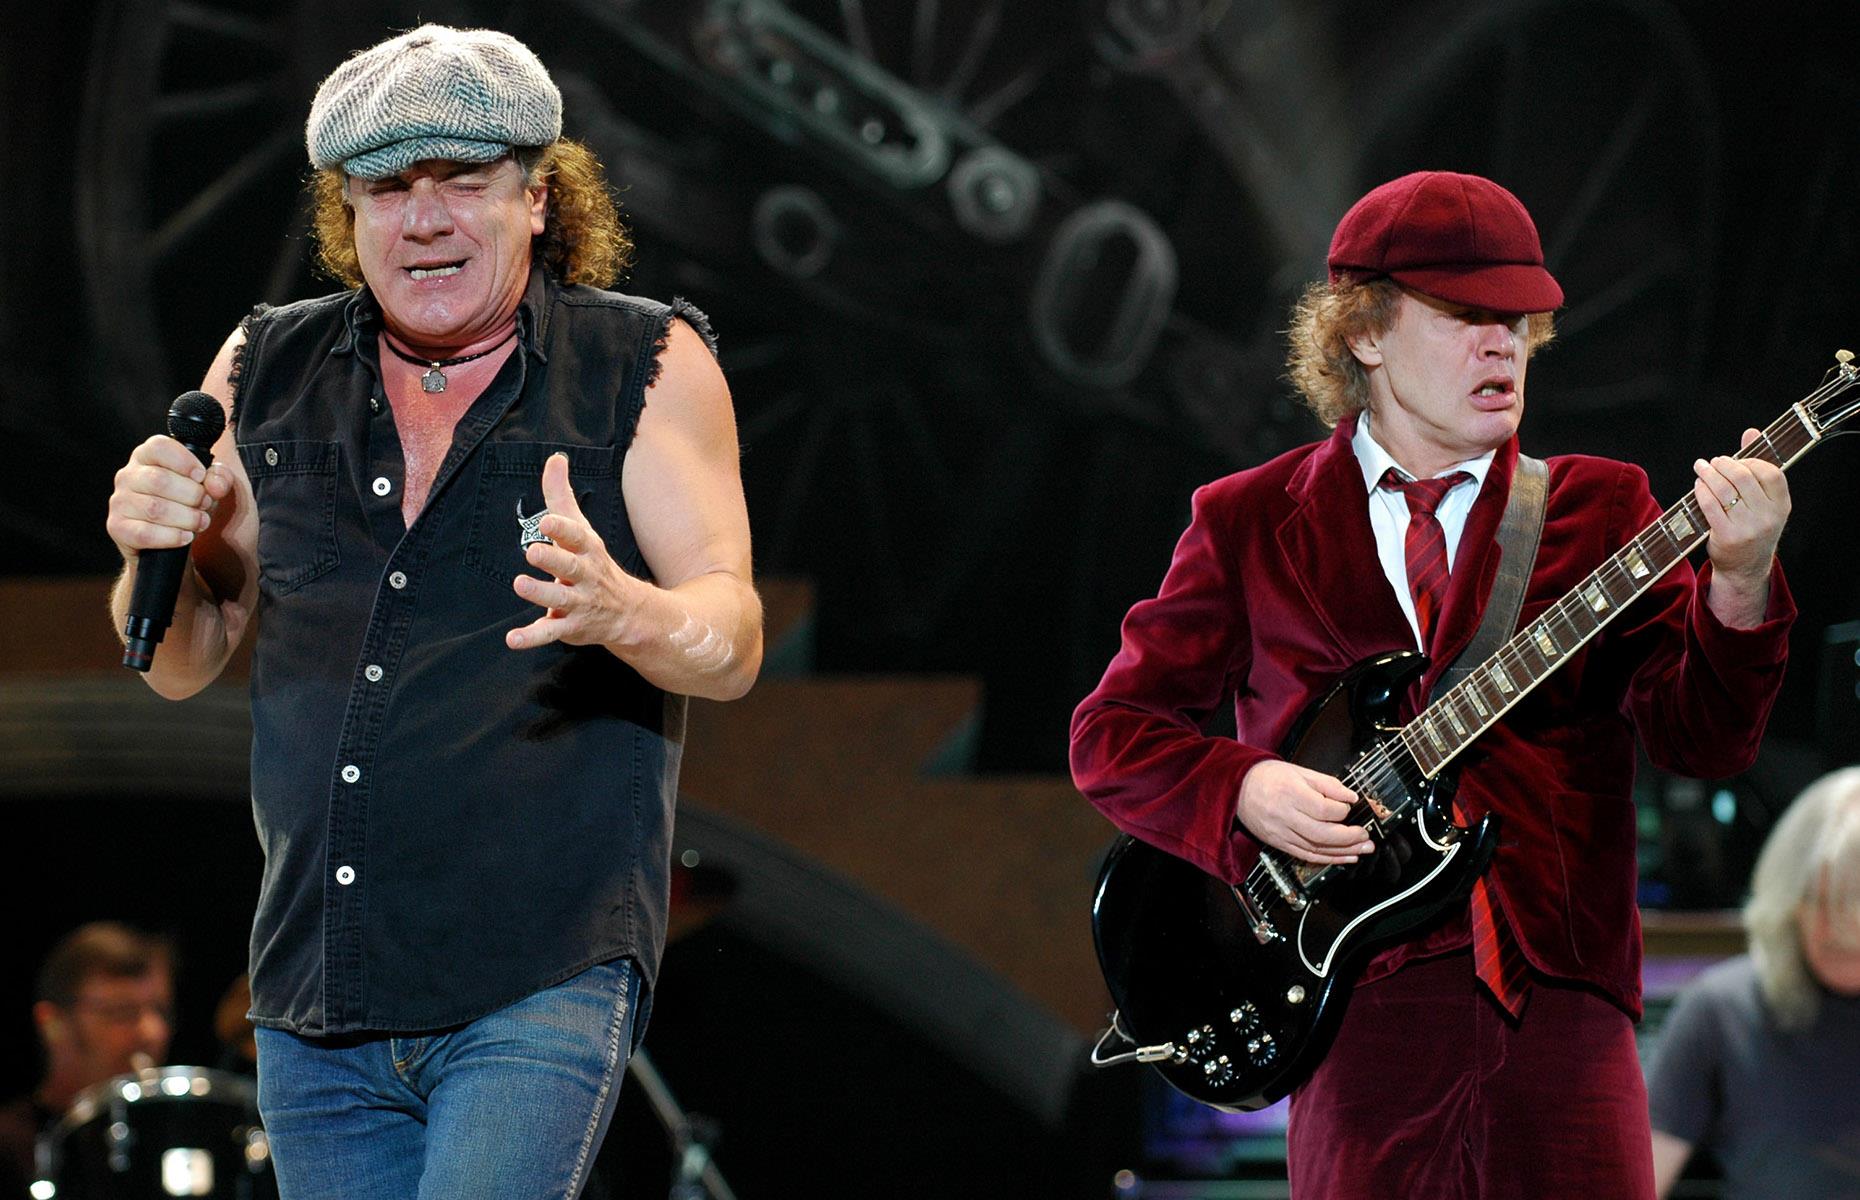 <p>AC/DC's electrifying <em>Black Ice World Tour</em> kicked off in October 2008, wrapping up 20 months later in June 2010. During this globetrotting trek, the rock veterans played a stunning 168 shows across five continents.</p>  <p>With more than five million tickets snapped up by their legion of devoted fans, the tour grossed $442 million. That's an impressive $637 million today, making it the band's most financially successful tour ever.</p>  <p>Throughout the tour's marathon run, AC/DC treated attendees to pulse-racing performances of songs from their fifteenth studio album, <em>Black Ice</em>, as well as classic hits like <em>Hells Bells</em> and <em>You Shook Me All Night Long.</em></p>  <p><span><strong>Liking this? Click on the Follow button above for more great stories from loveMONEY</strong></span></p>